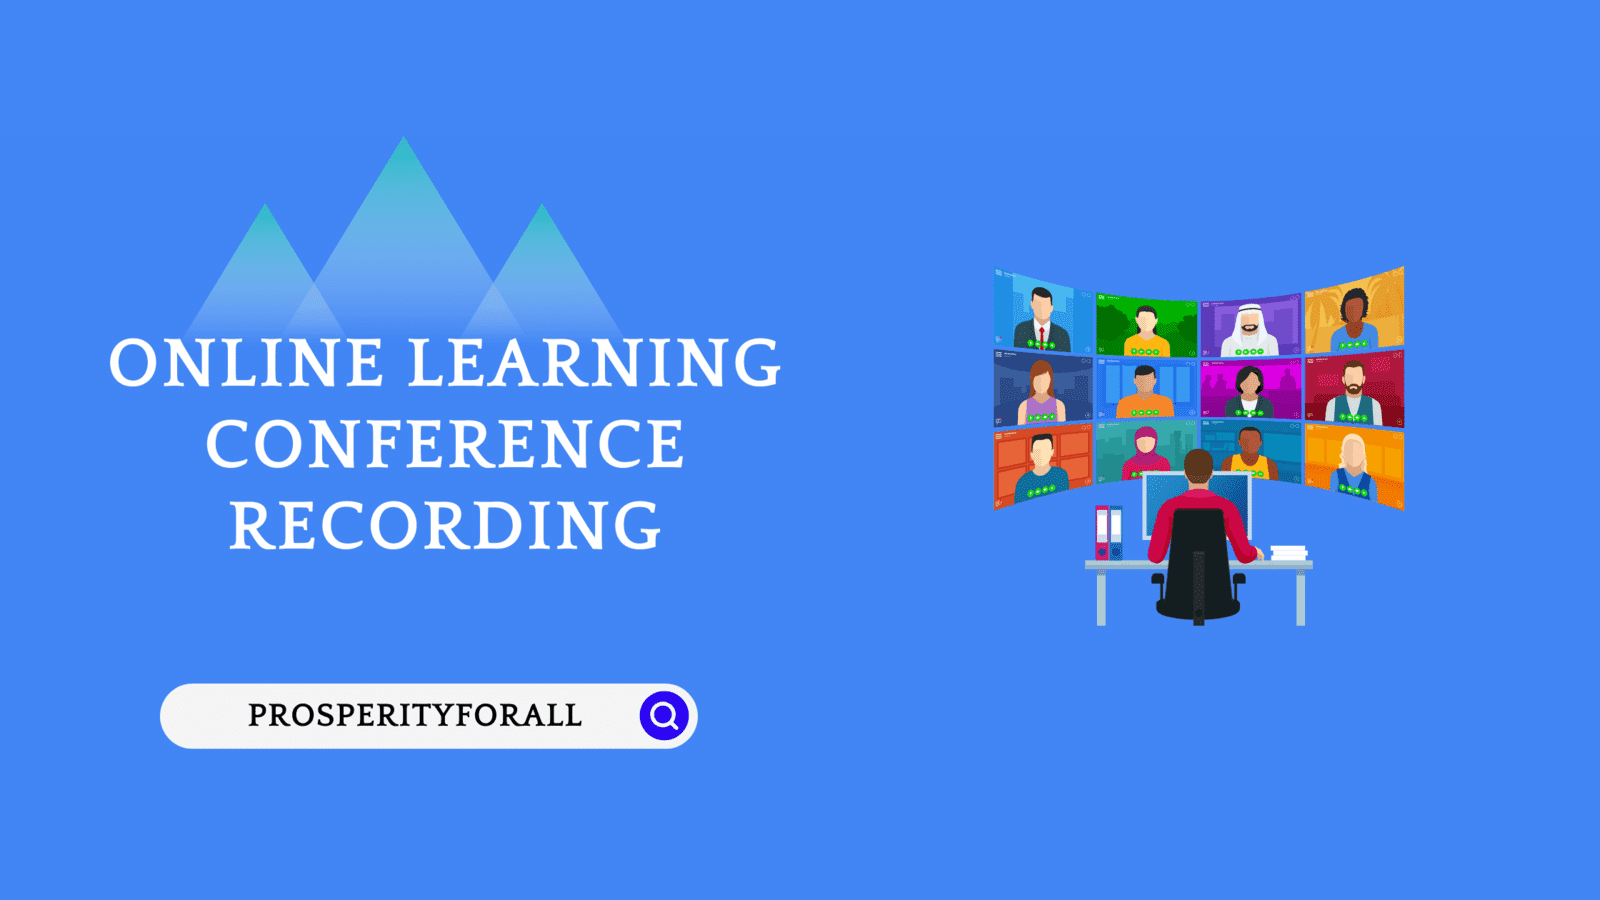 Best Online Learning Conference Recording Platforms - ProsperityForAll